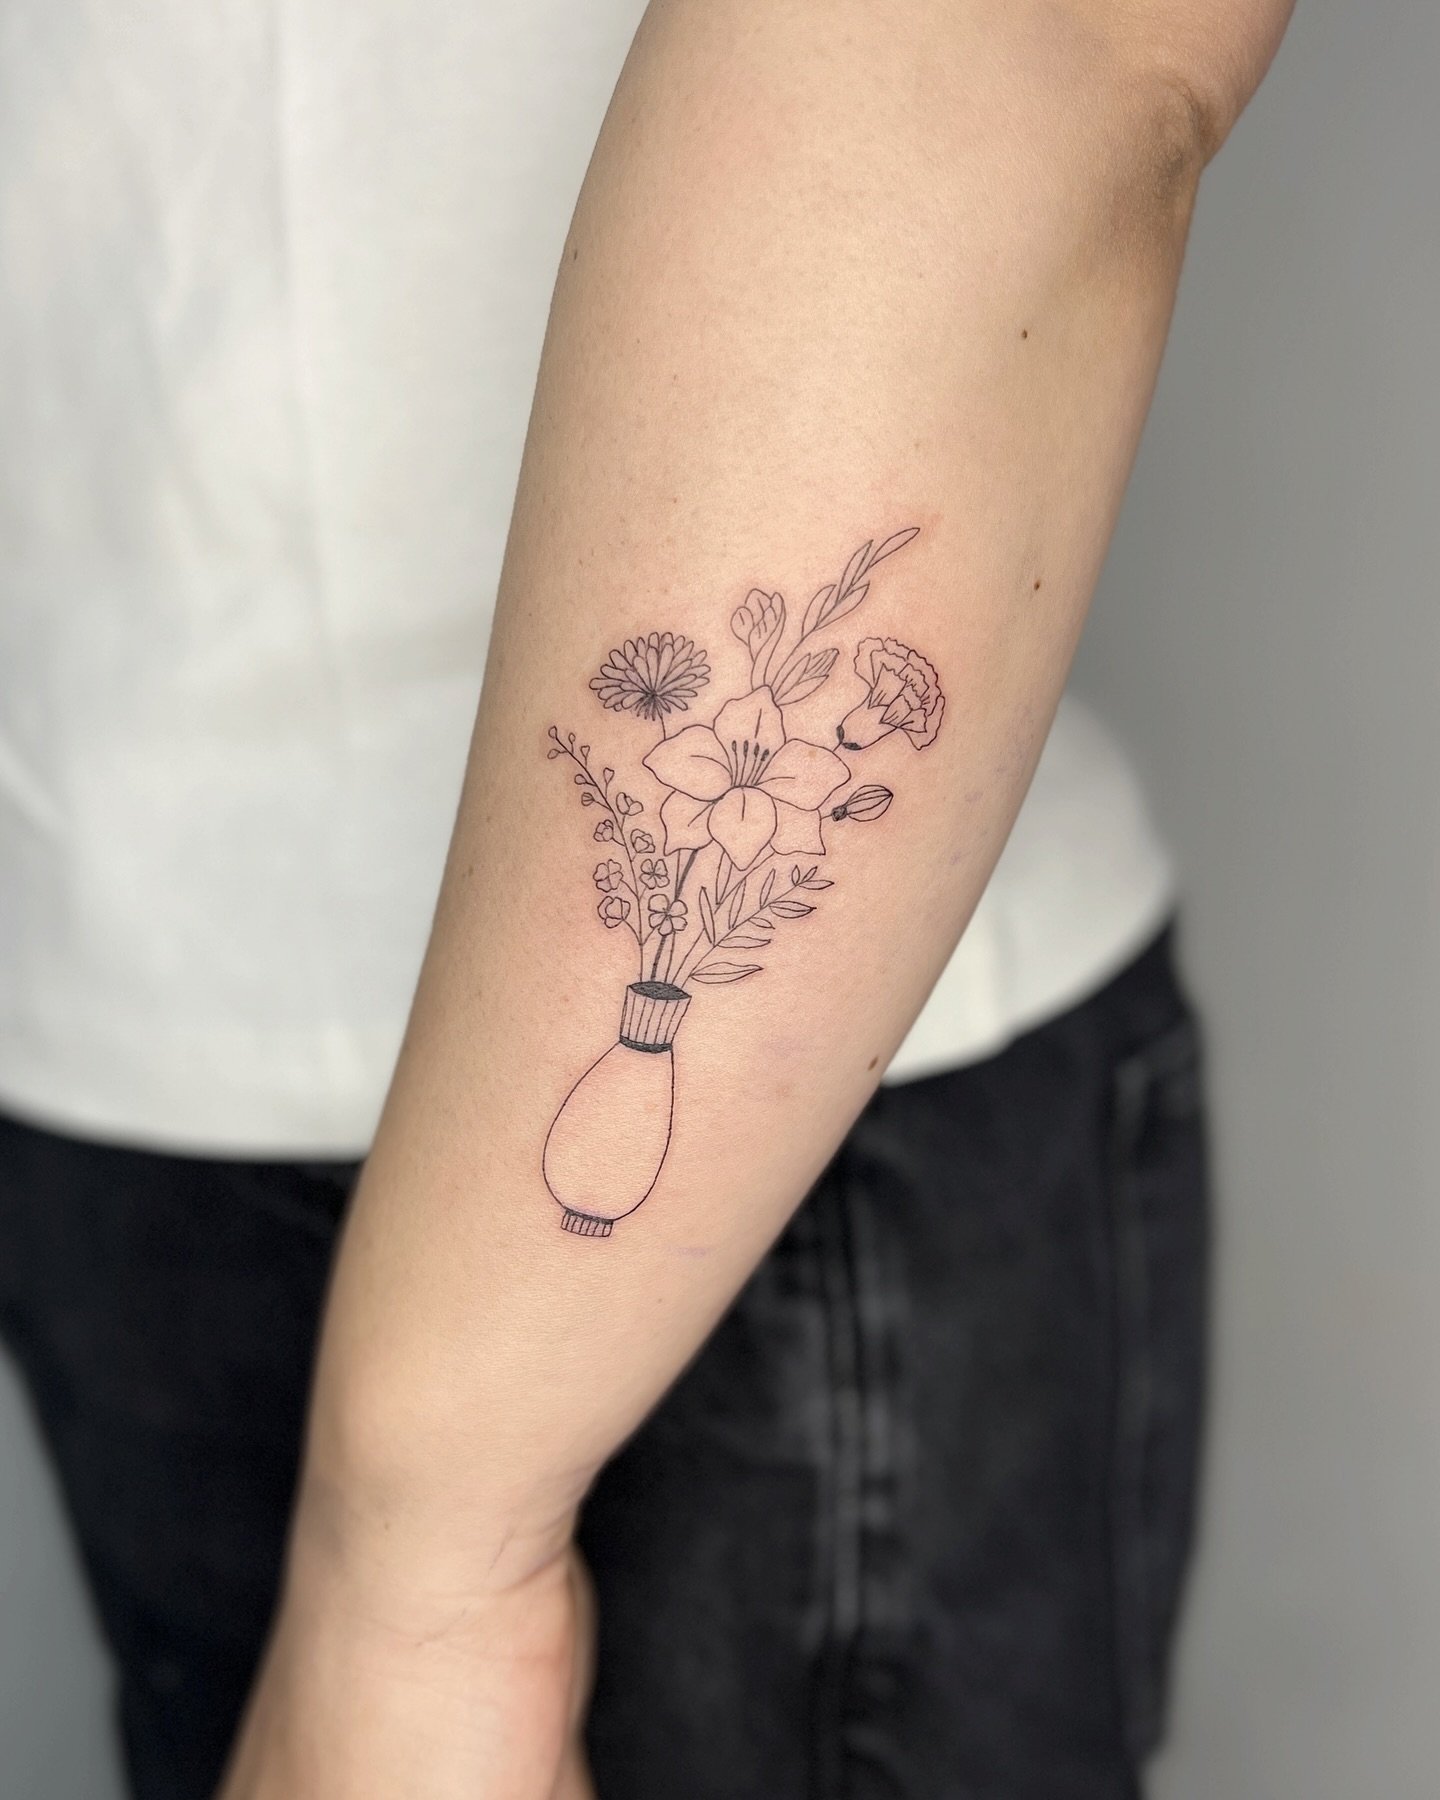 Bunch of flowers for Hanna 💐 Thanks girl!

⫸ 
Booking info: If you want to get inked, please stay patient. My books are closed till June 2024. New dates will be  announced soon 🫶🏻 #nodms 

#flowertattoo #flowerbouquettattoo #frauinestattoo